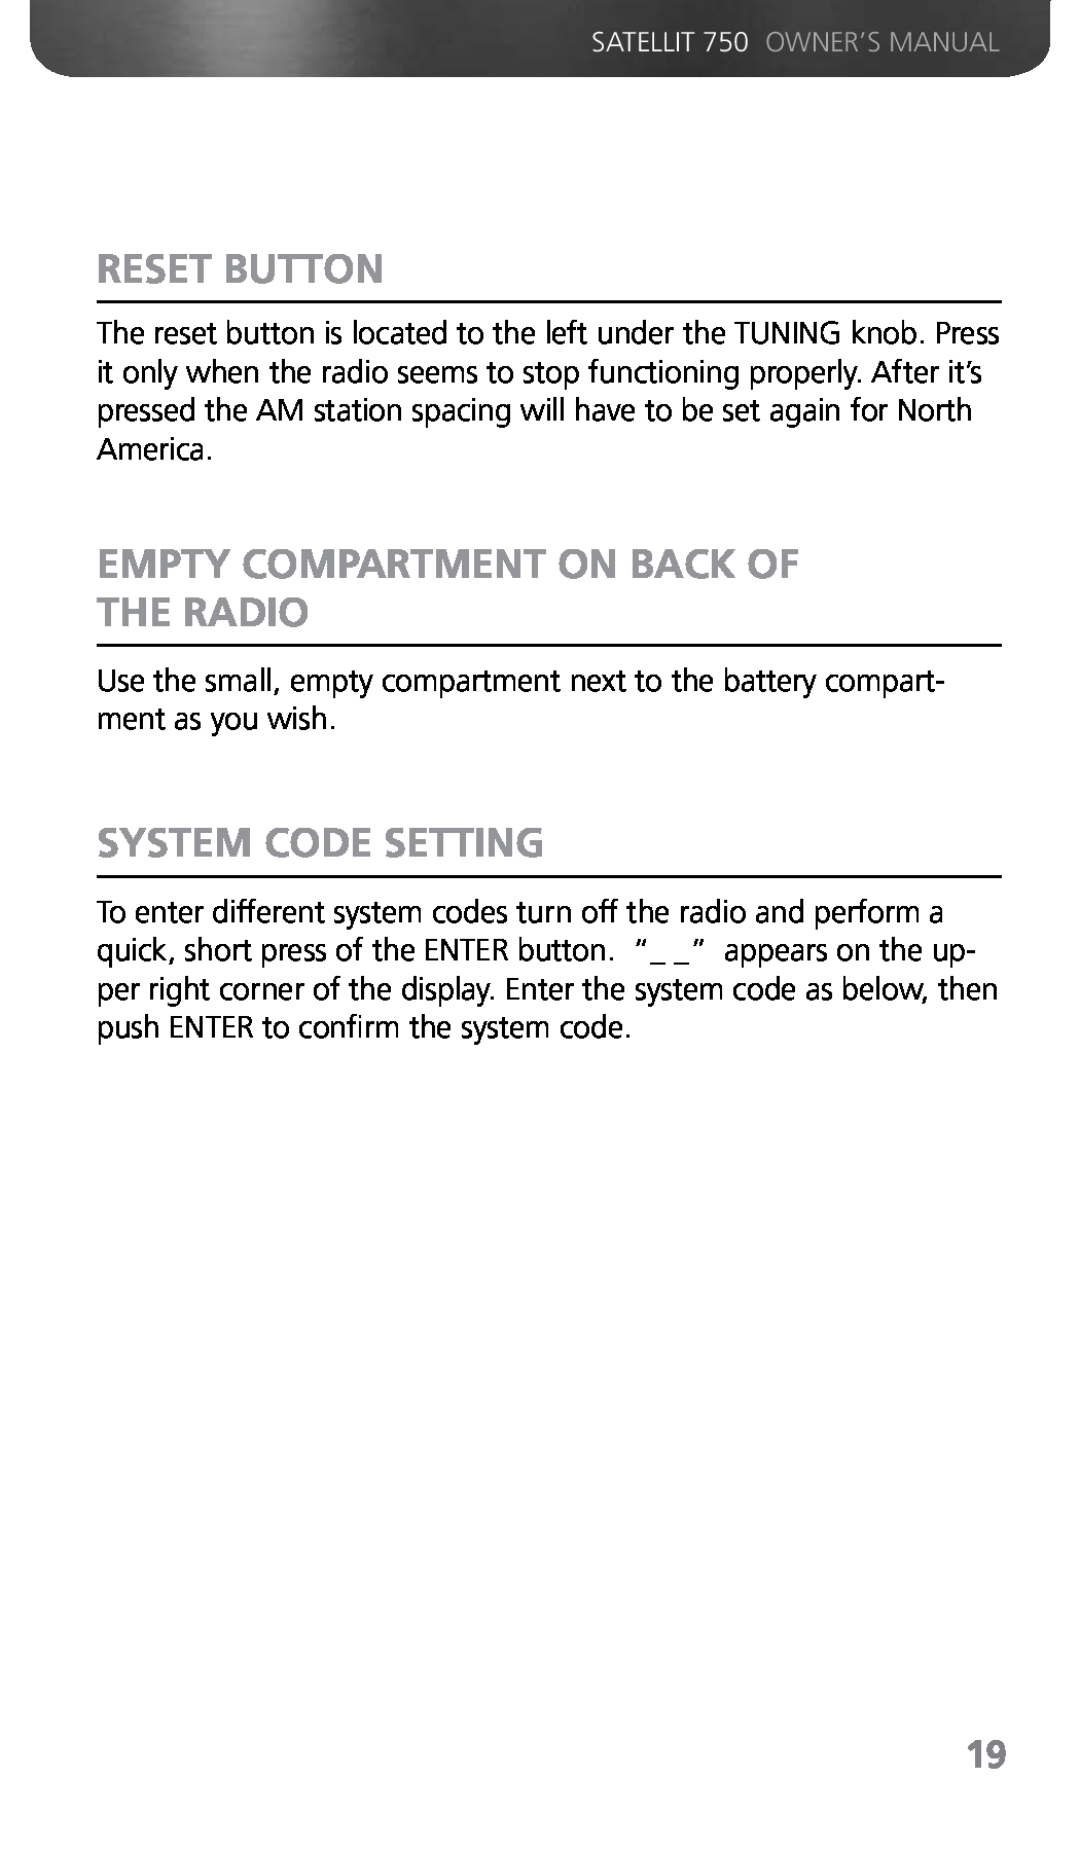 Grundig 750 owner manual Reset Button, Empty Compartment On Back Of The Radio, System Code Setting 